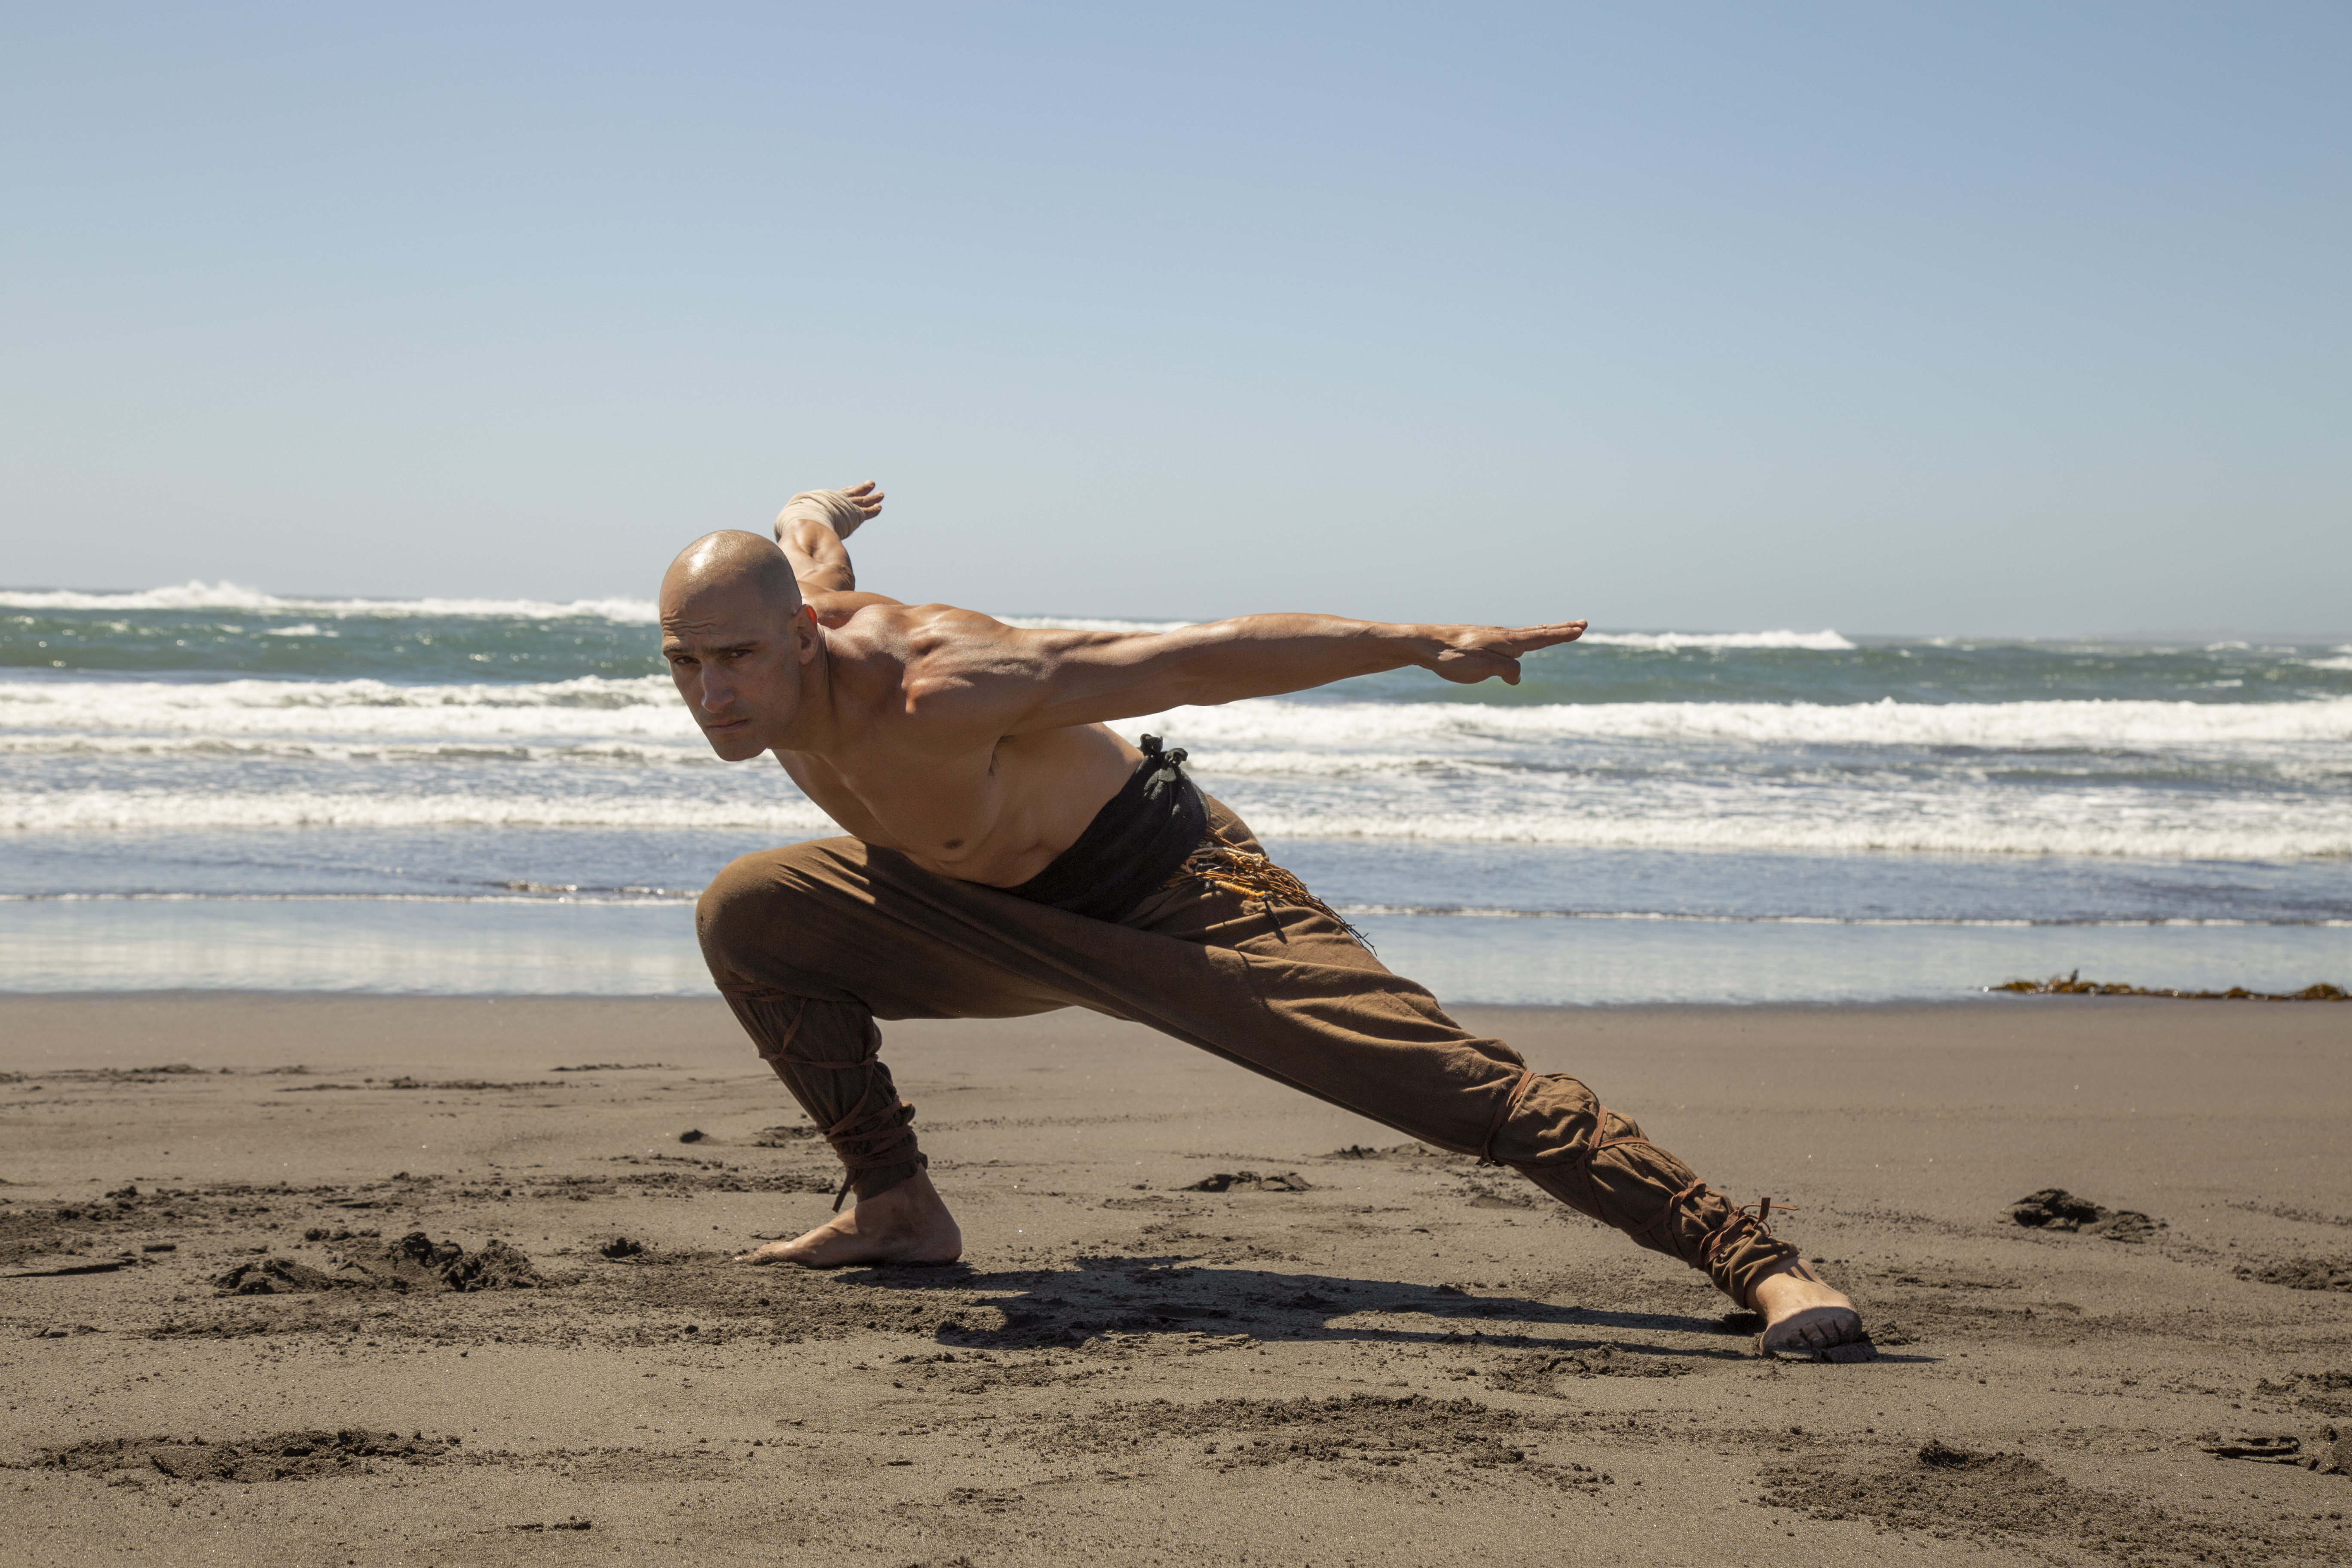 Marko Zaror crouches low in a defensive pose on a beach in Fist of the Condor, with the ocean behind him.